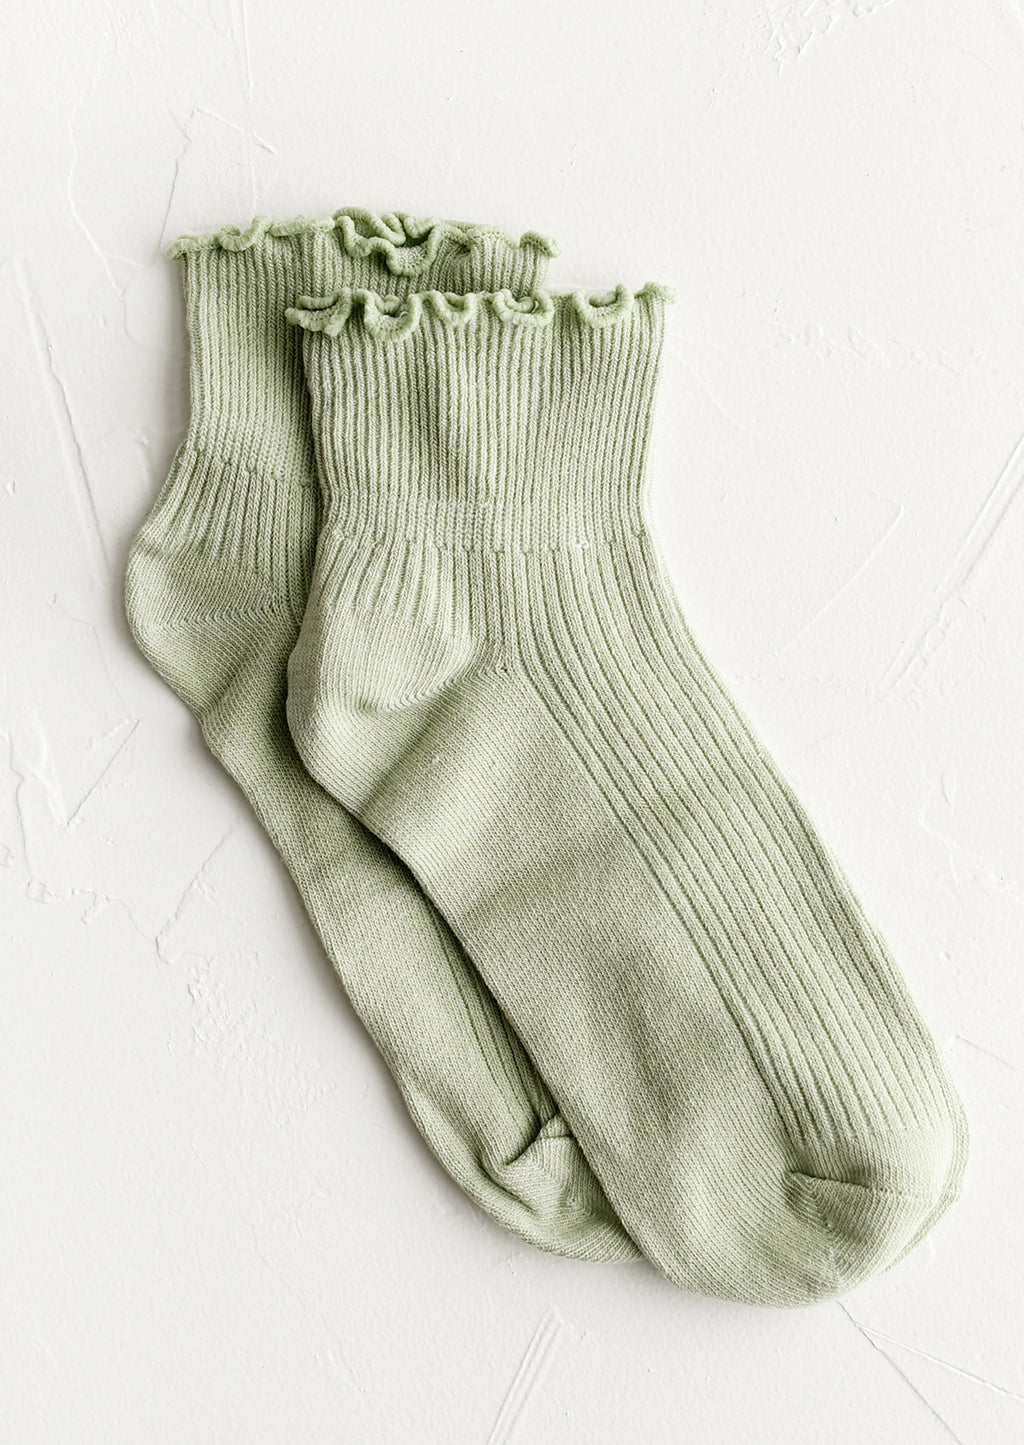 Mint: A pair of cotton ankle socks in mint.